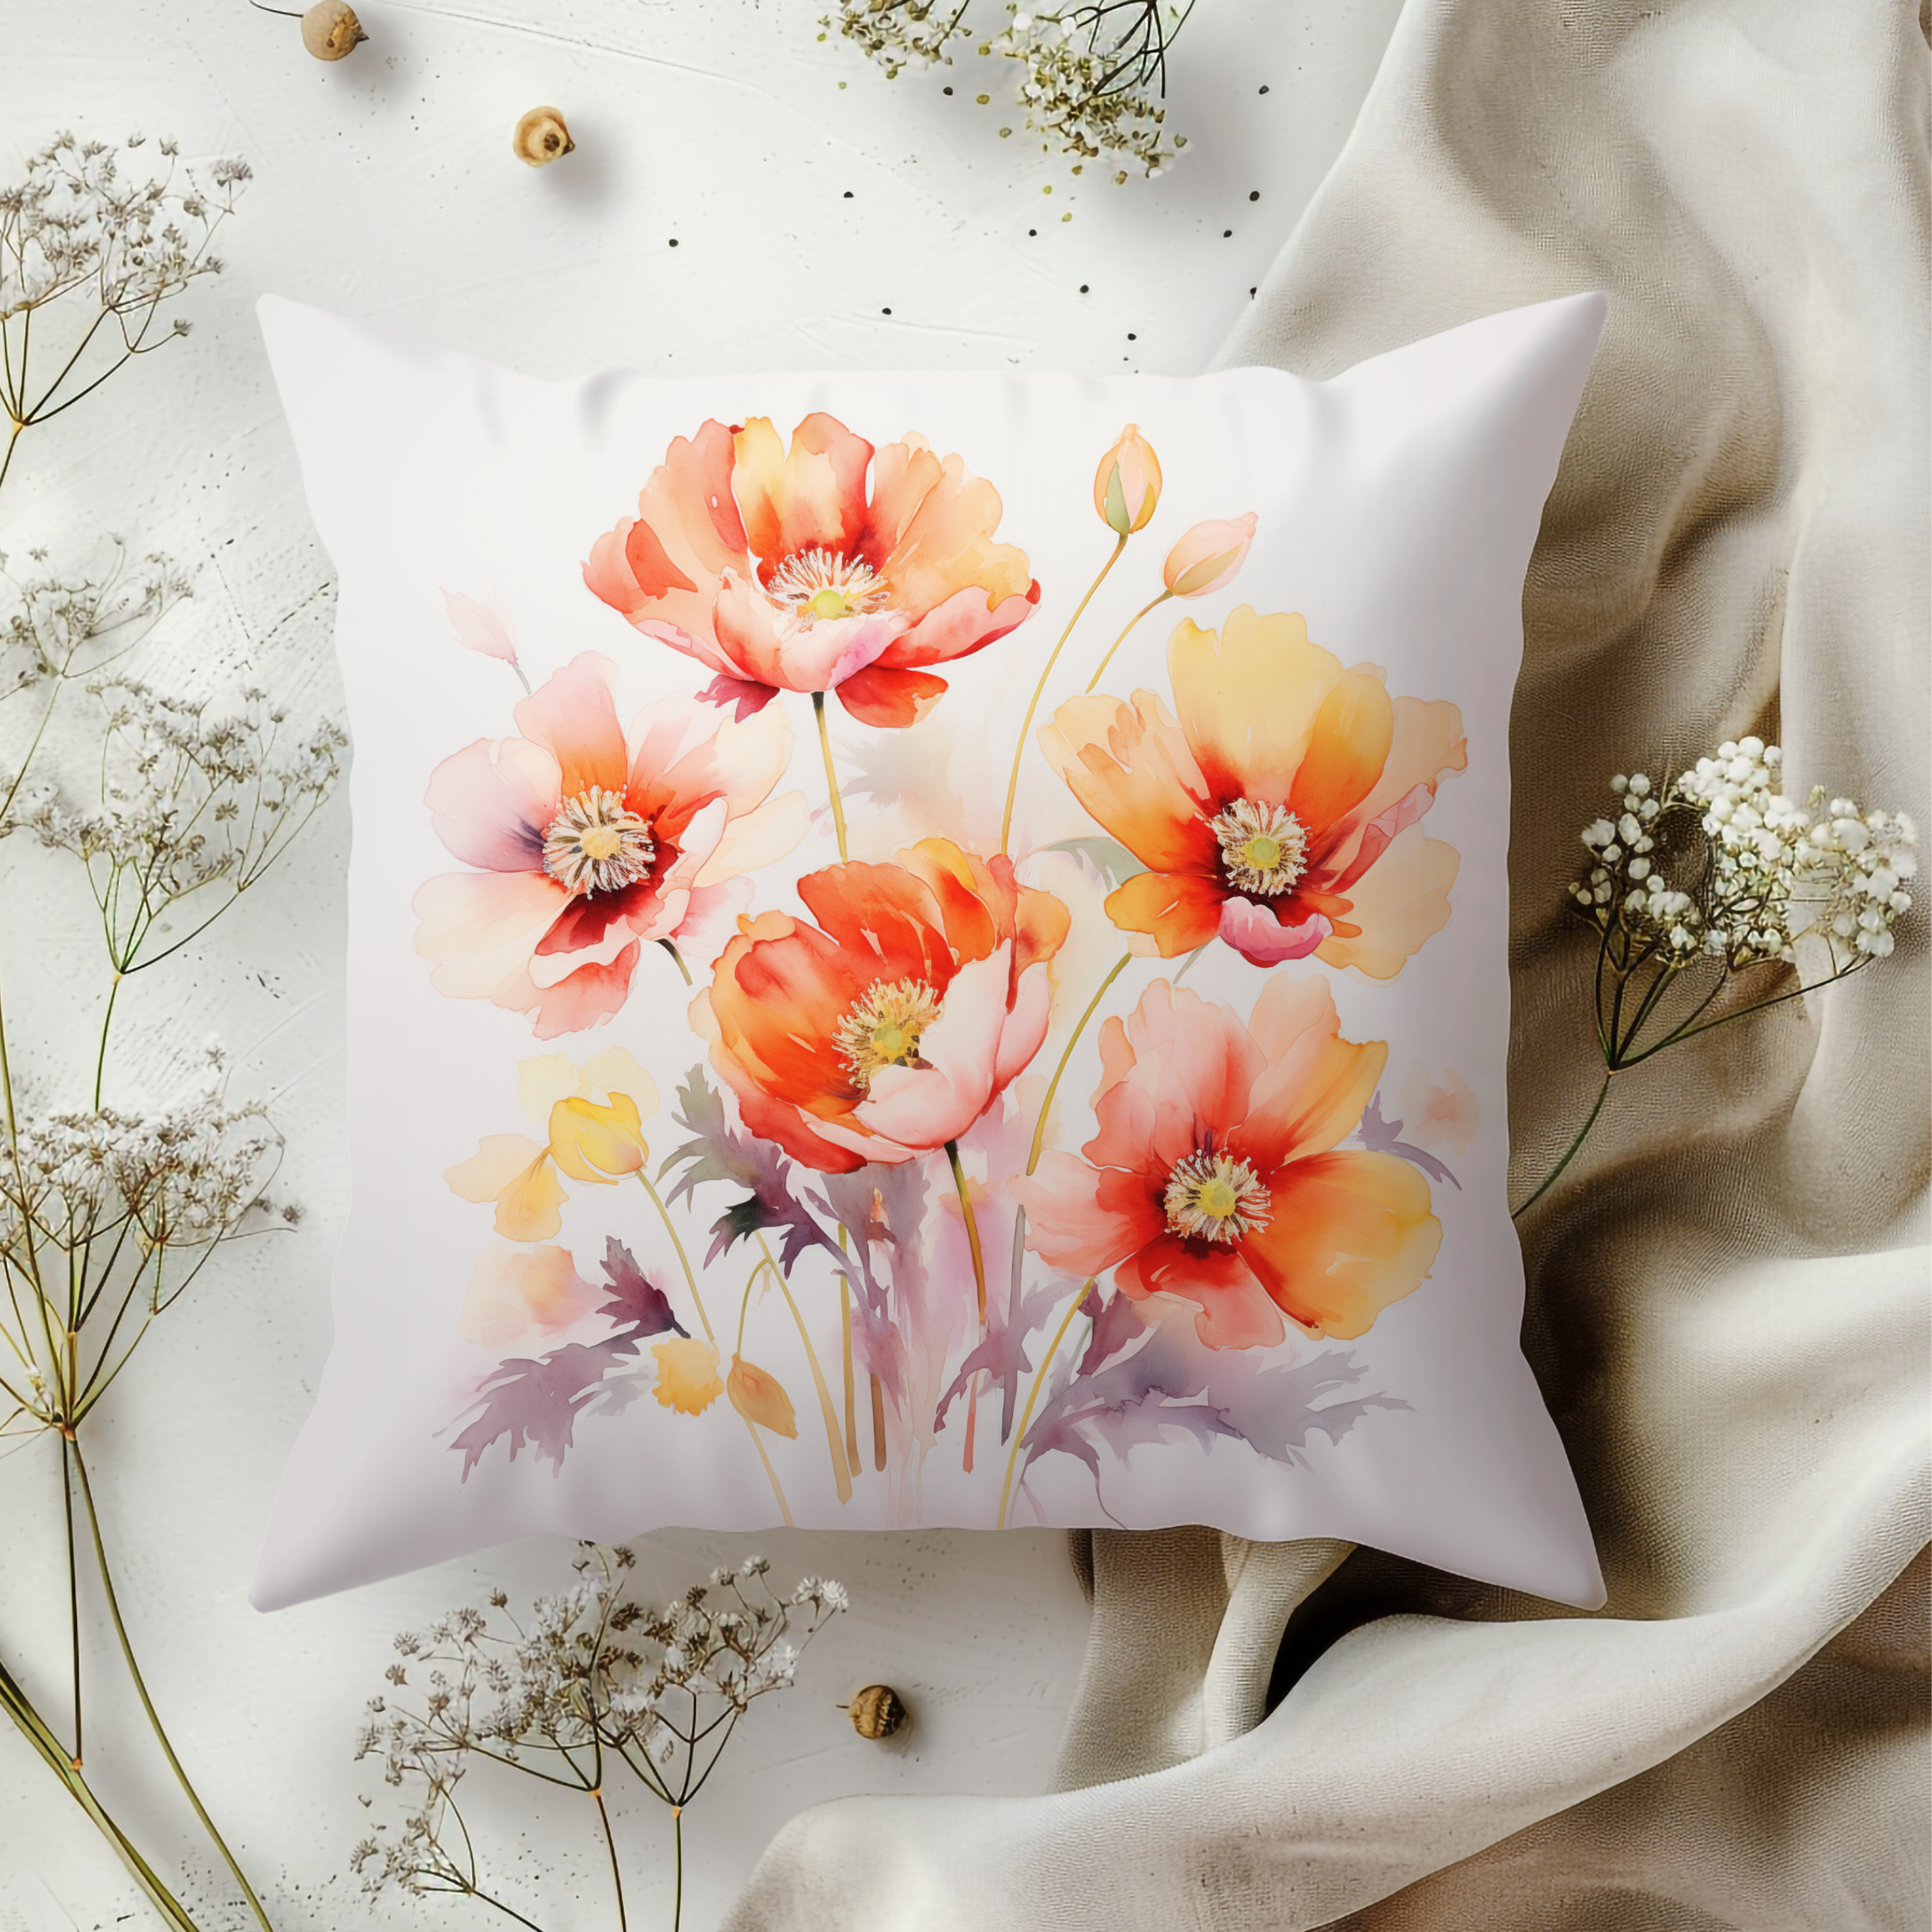 Sunset Blooms: Cozy Decorative Accent Pillow Cover